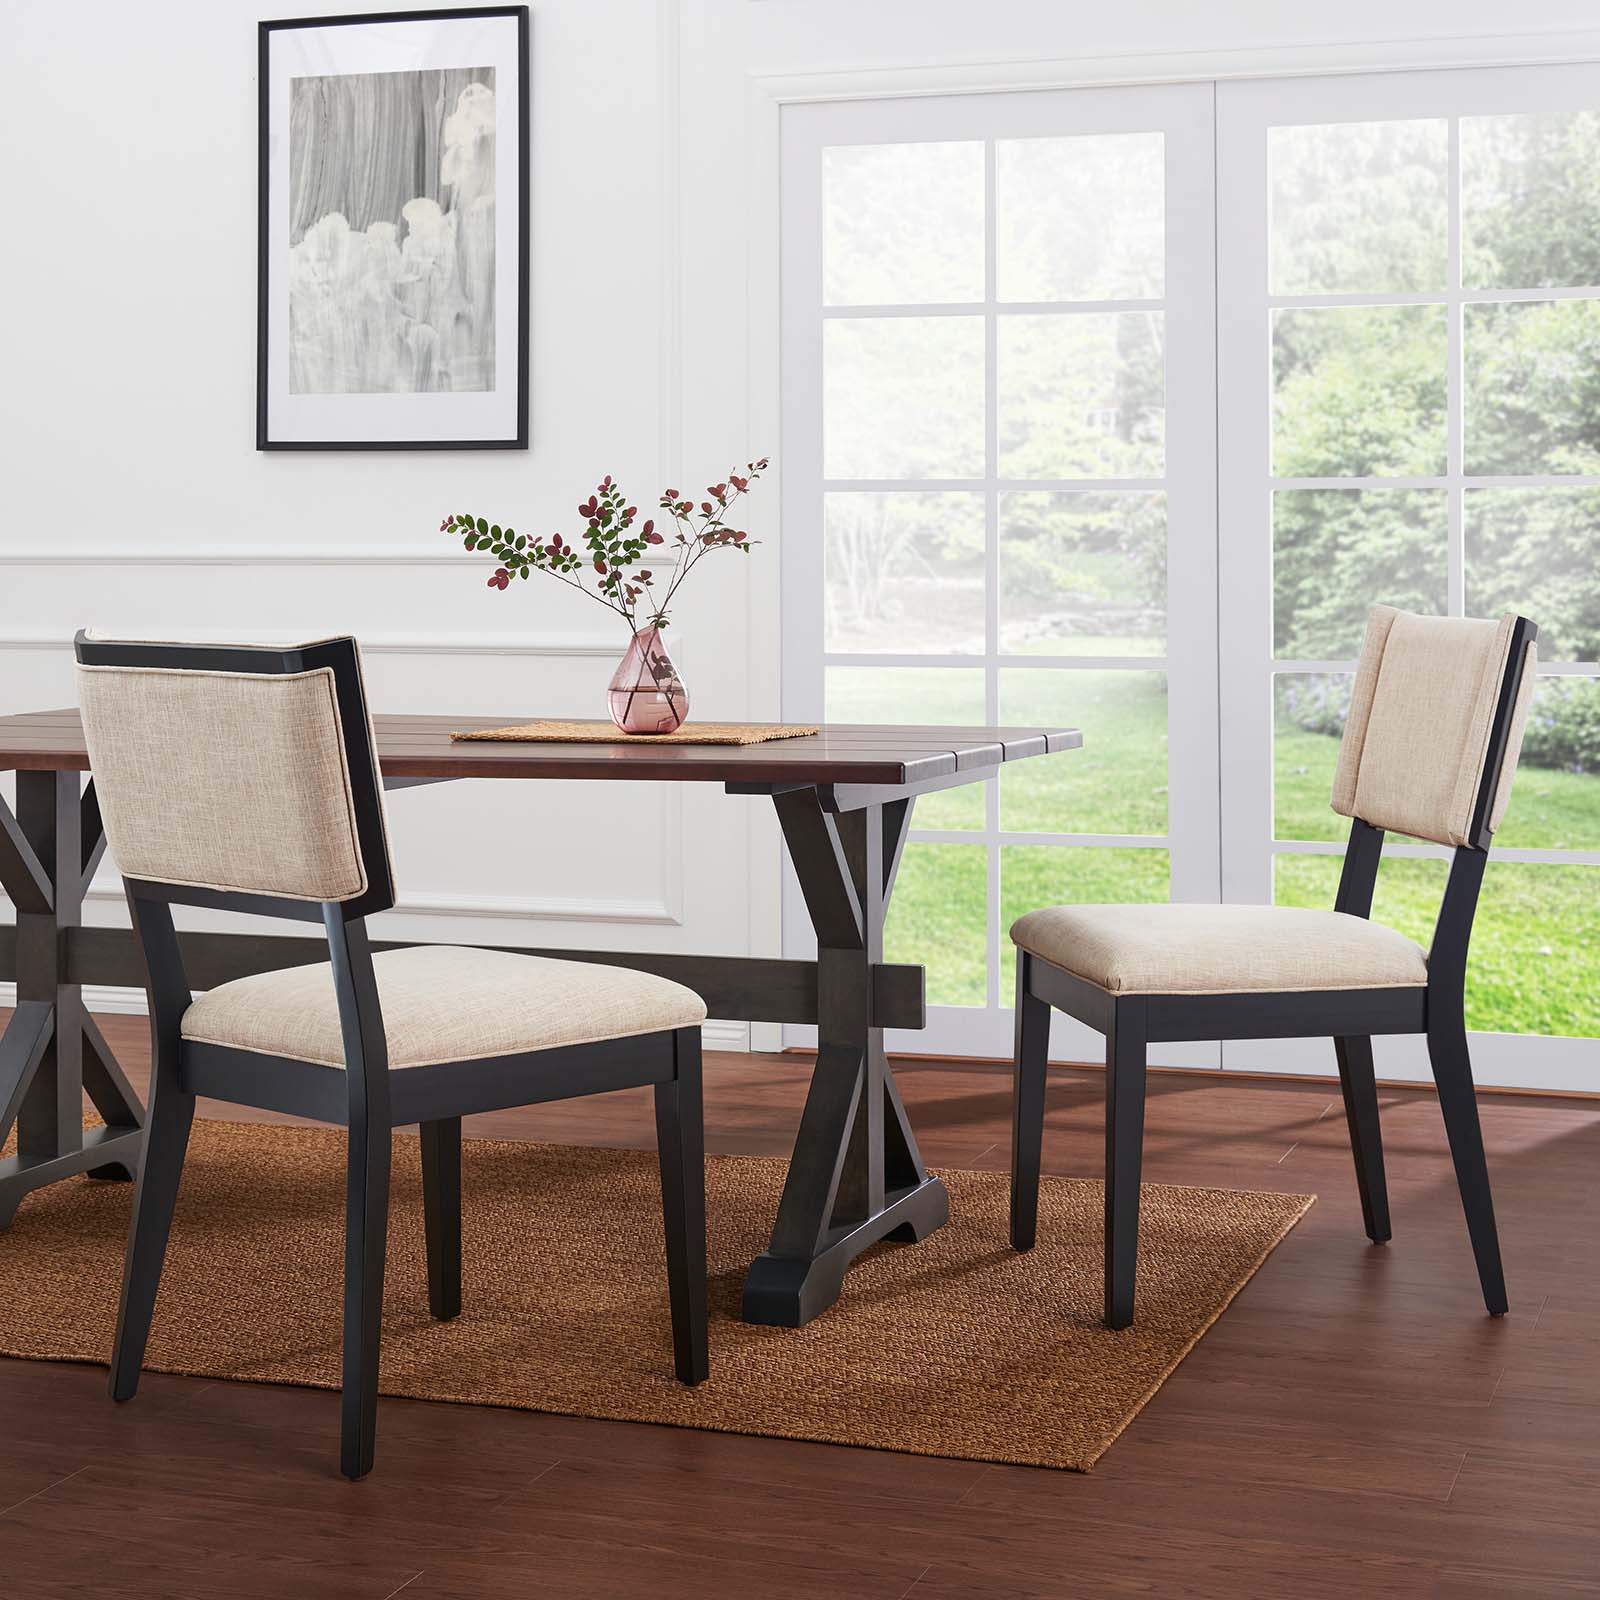 Esquire Dining Chairs - Set of 2